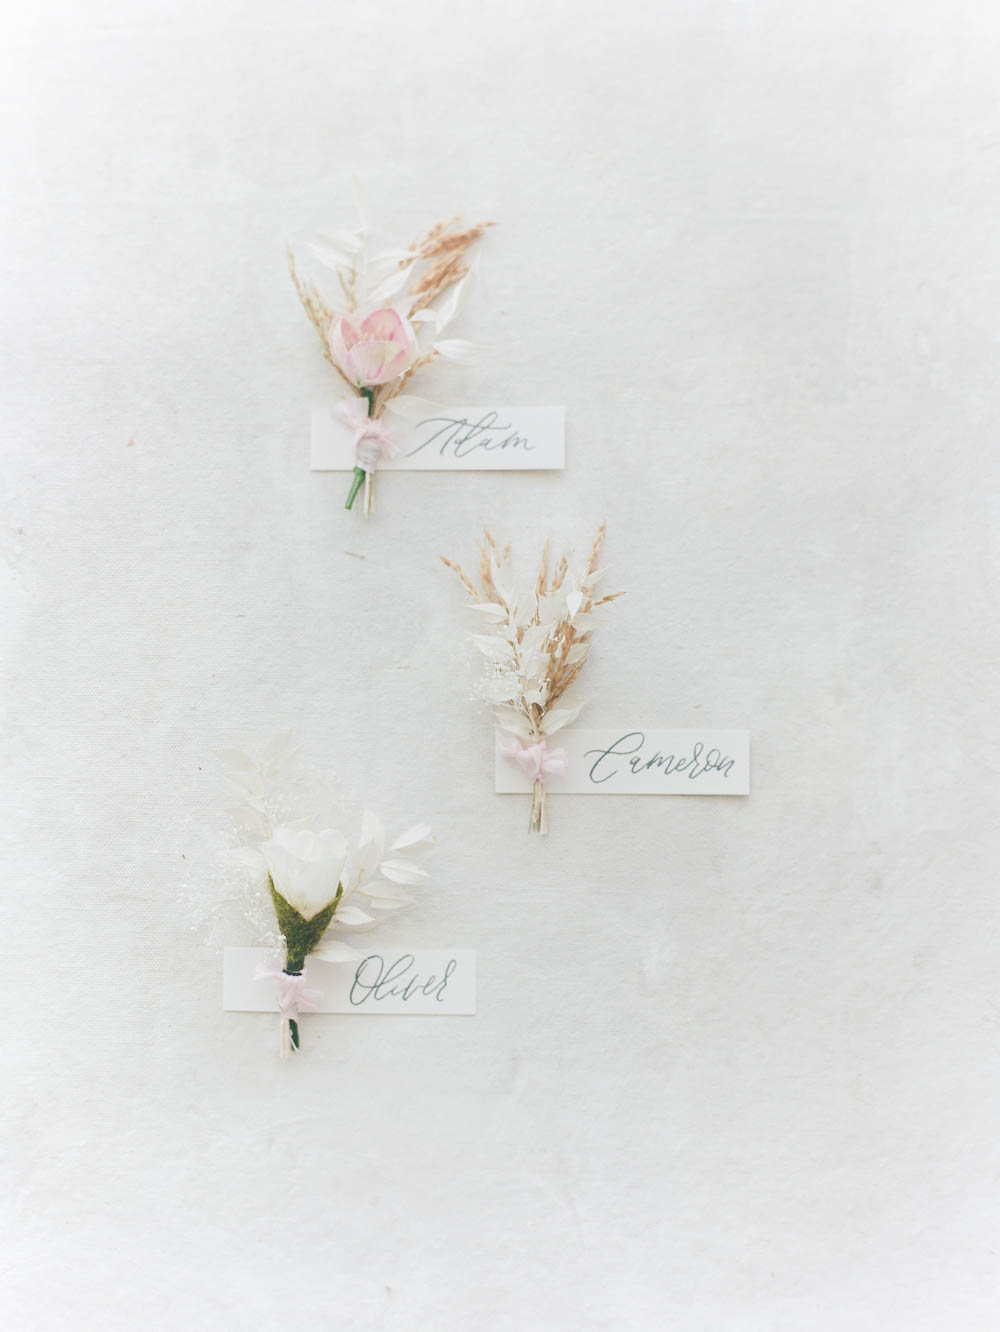 soft white and pink boutonnieres